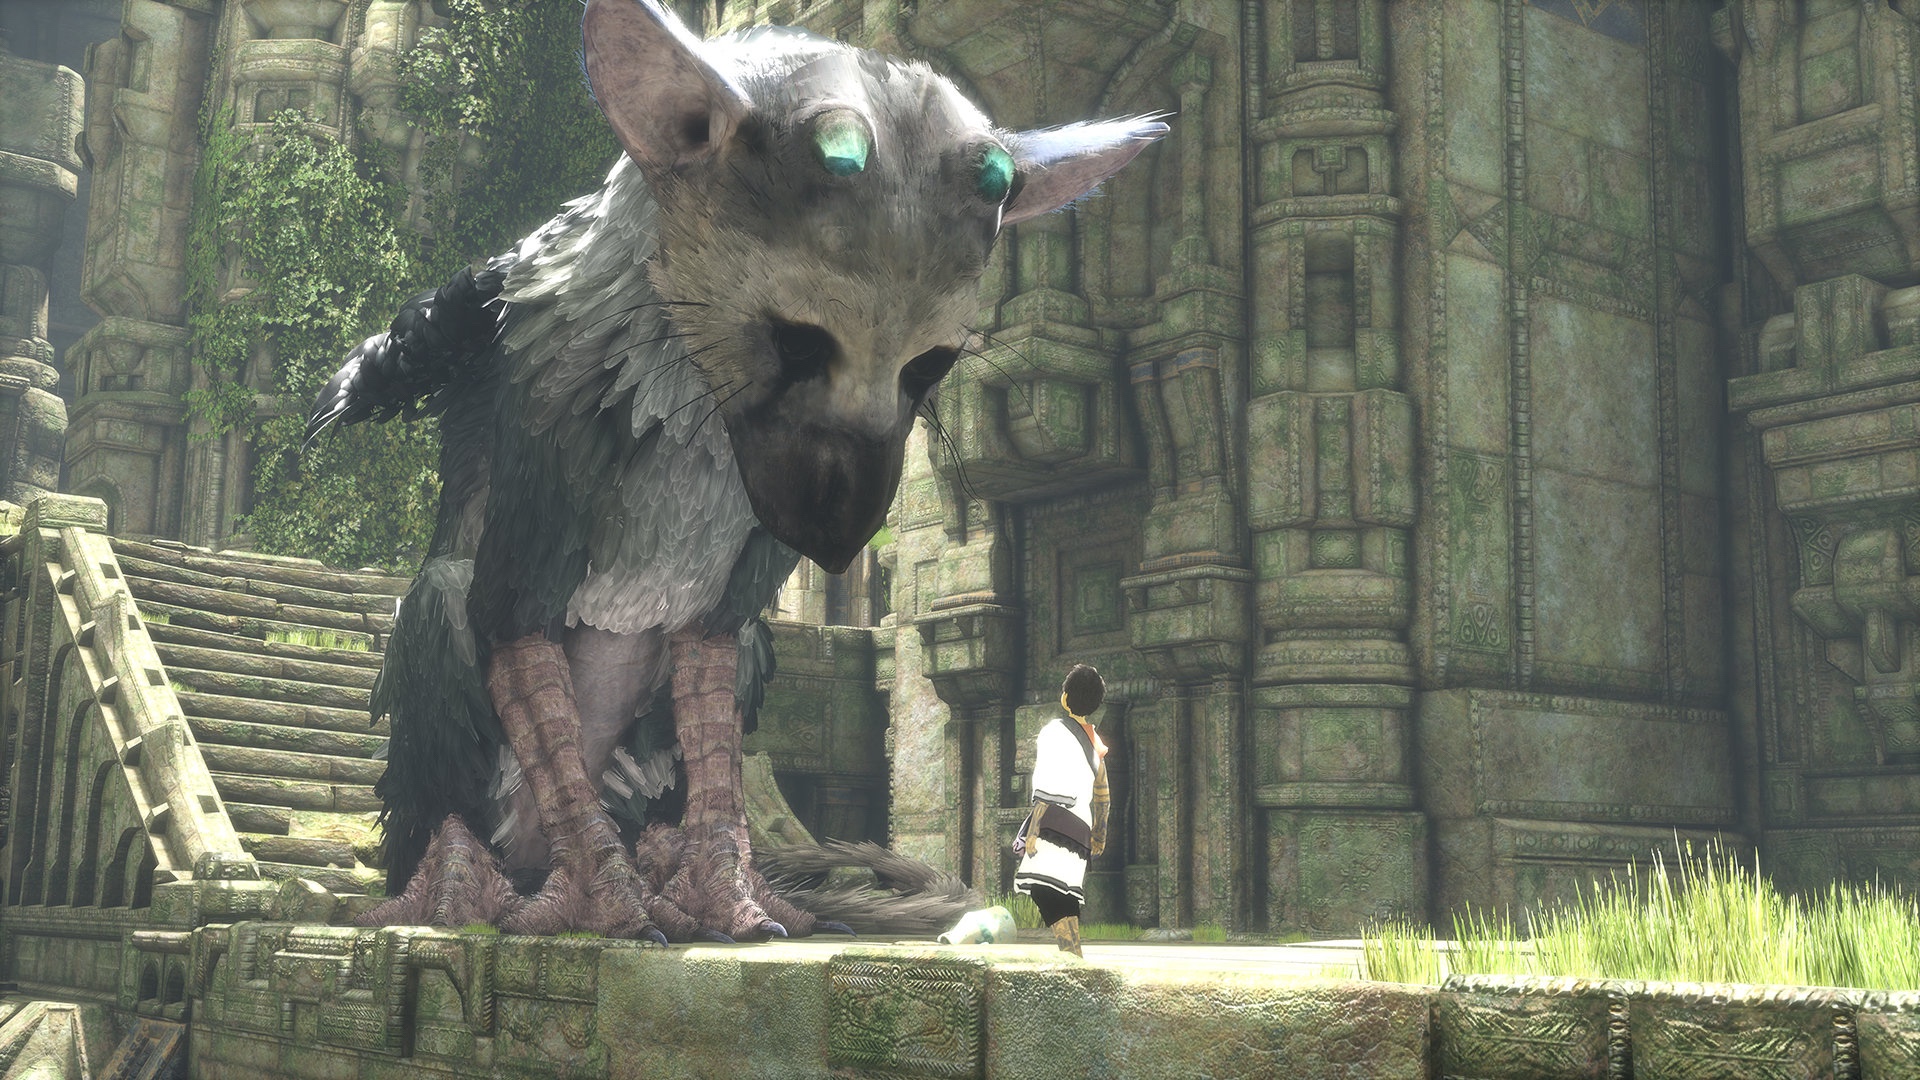 Best PS4 exclusive games - The Last Guardian